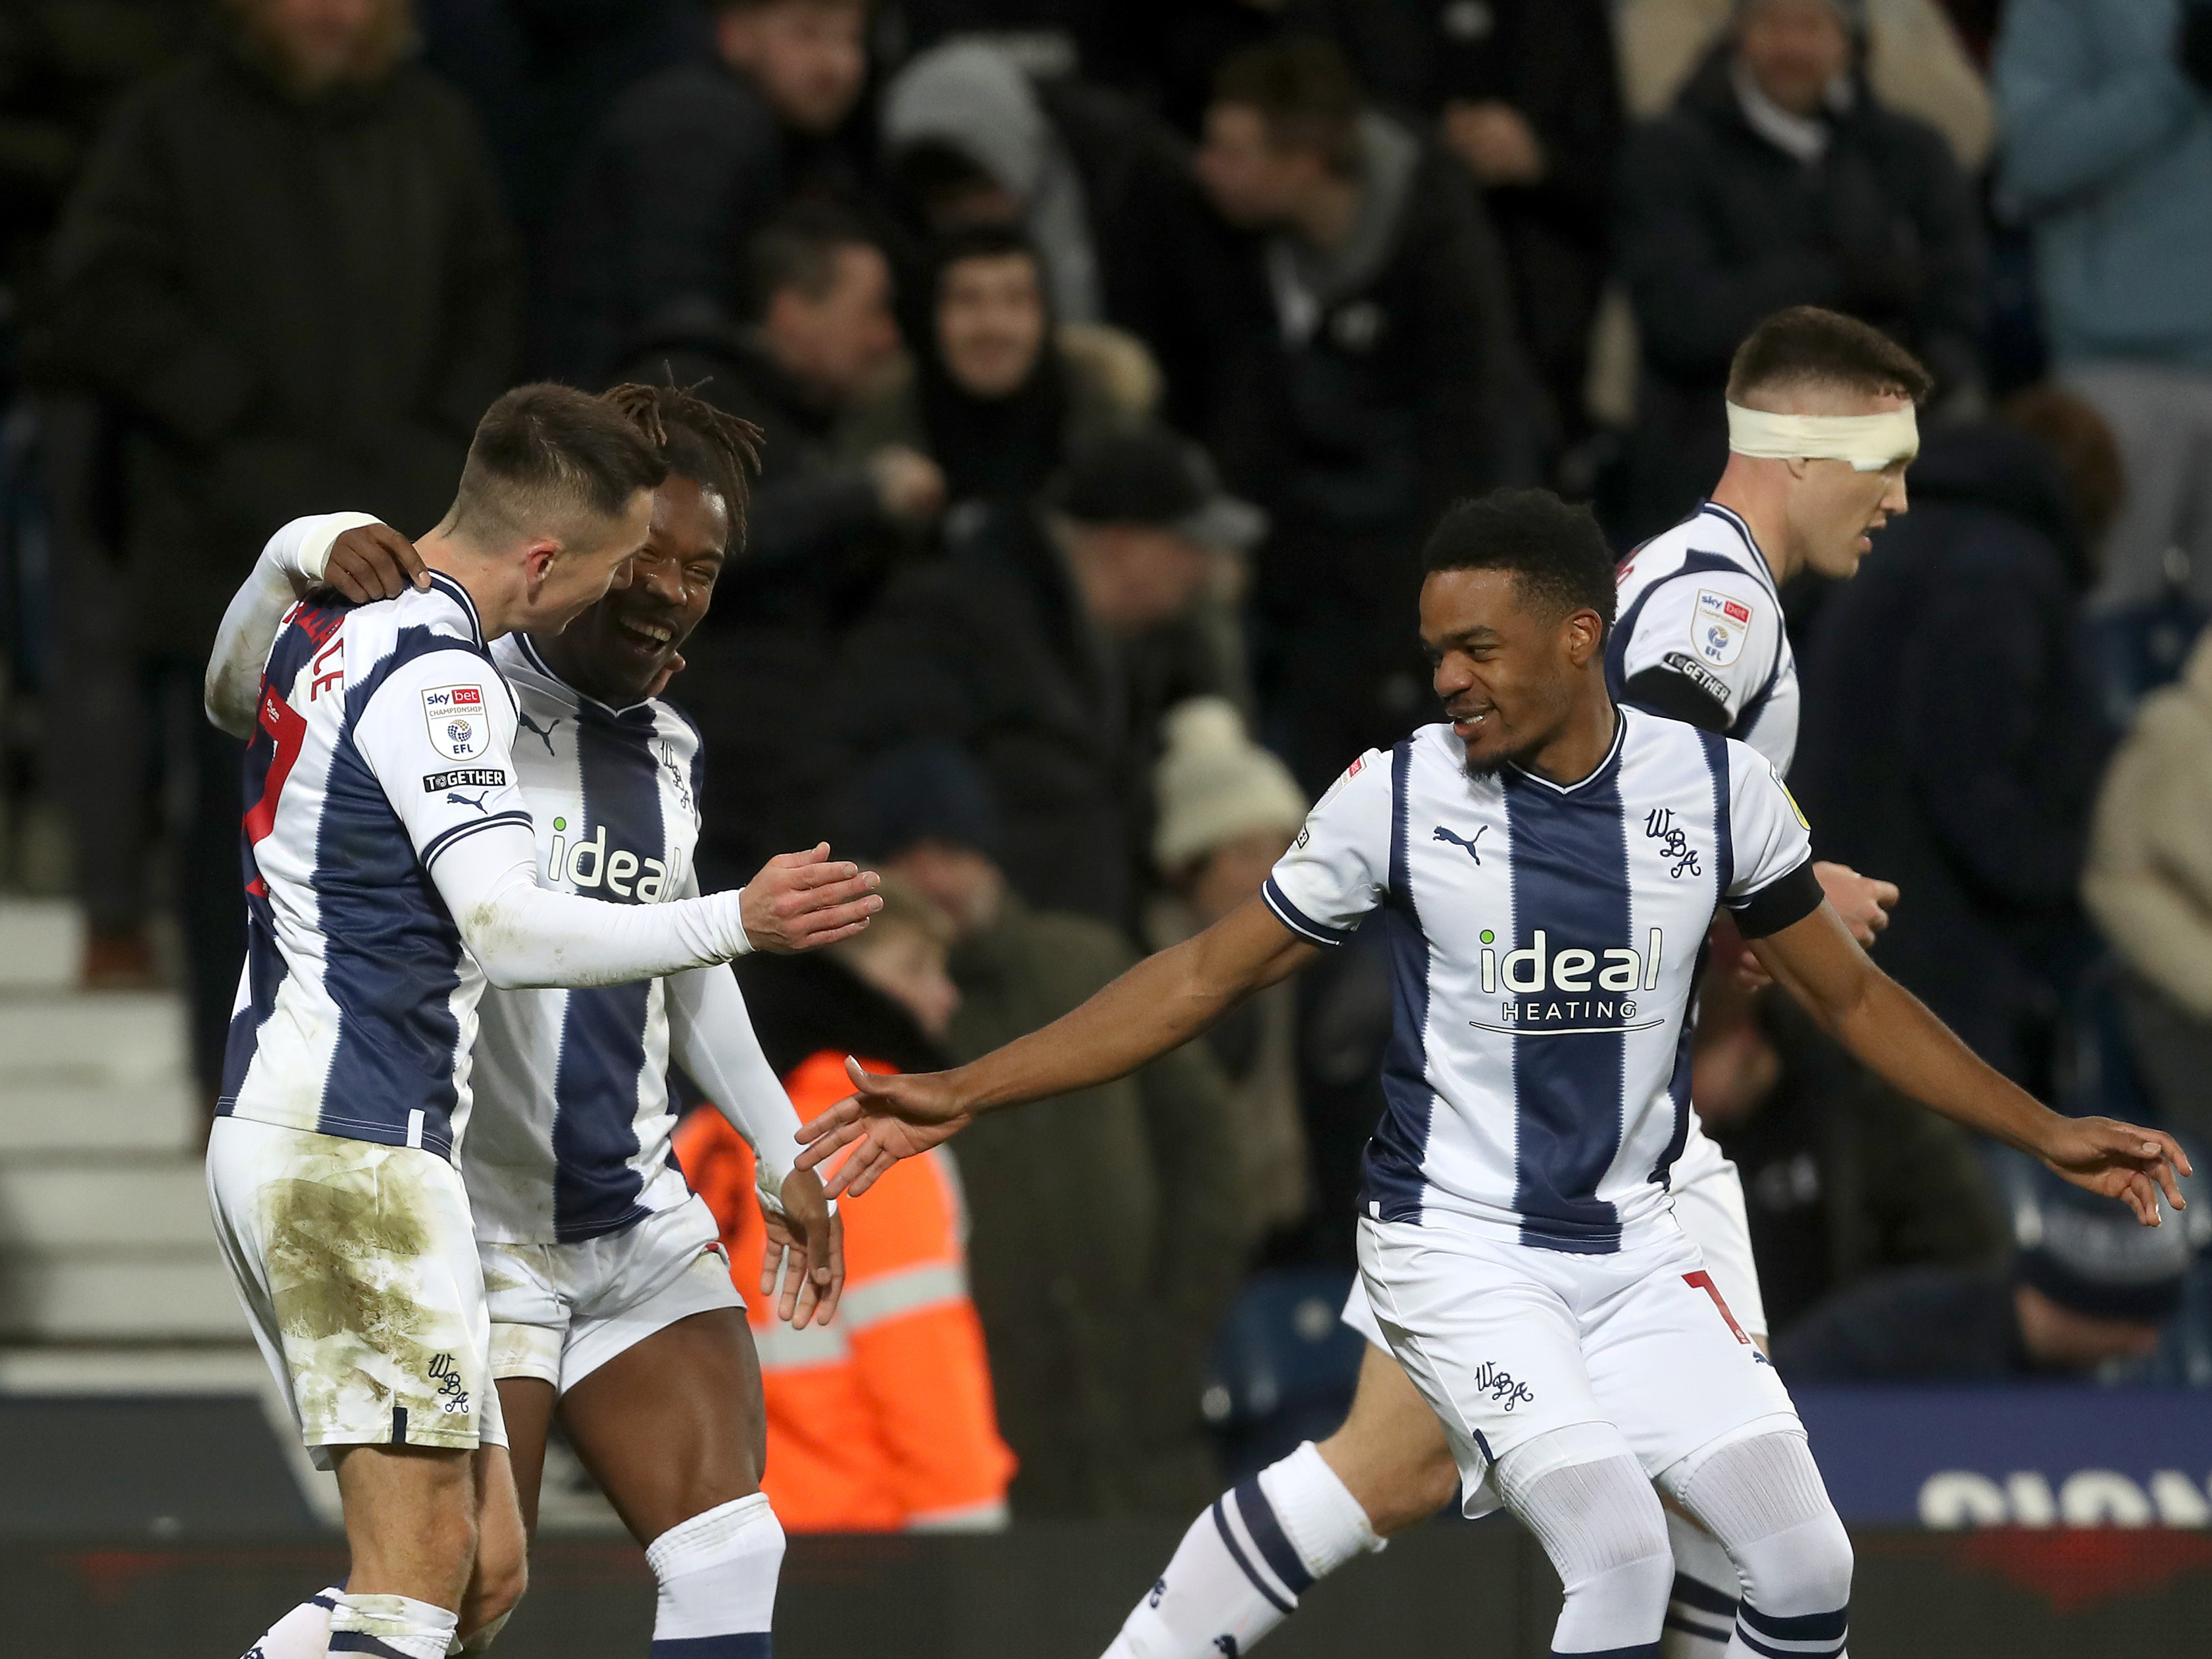 An image of Albion's players celebrating a goal against Rotherham